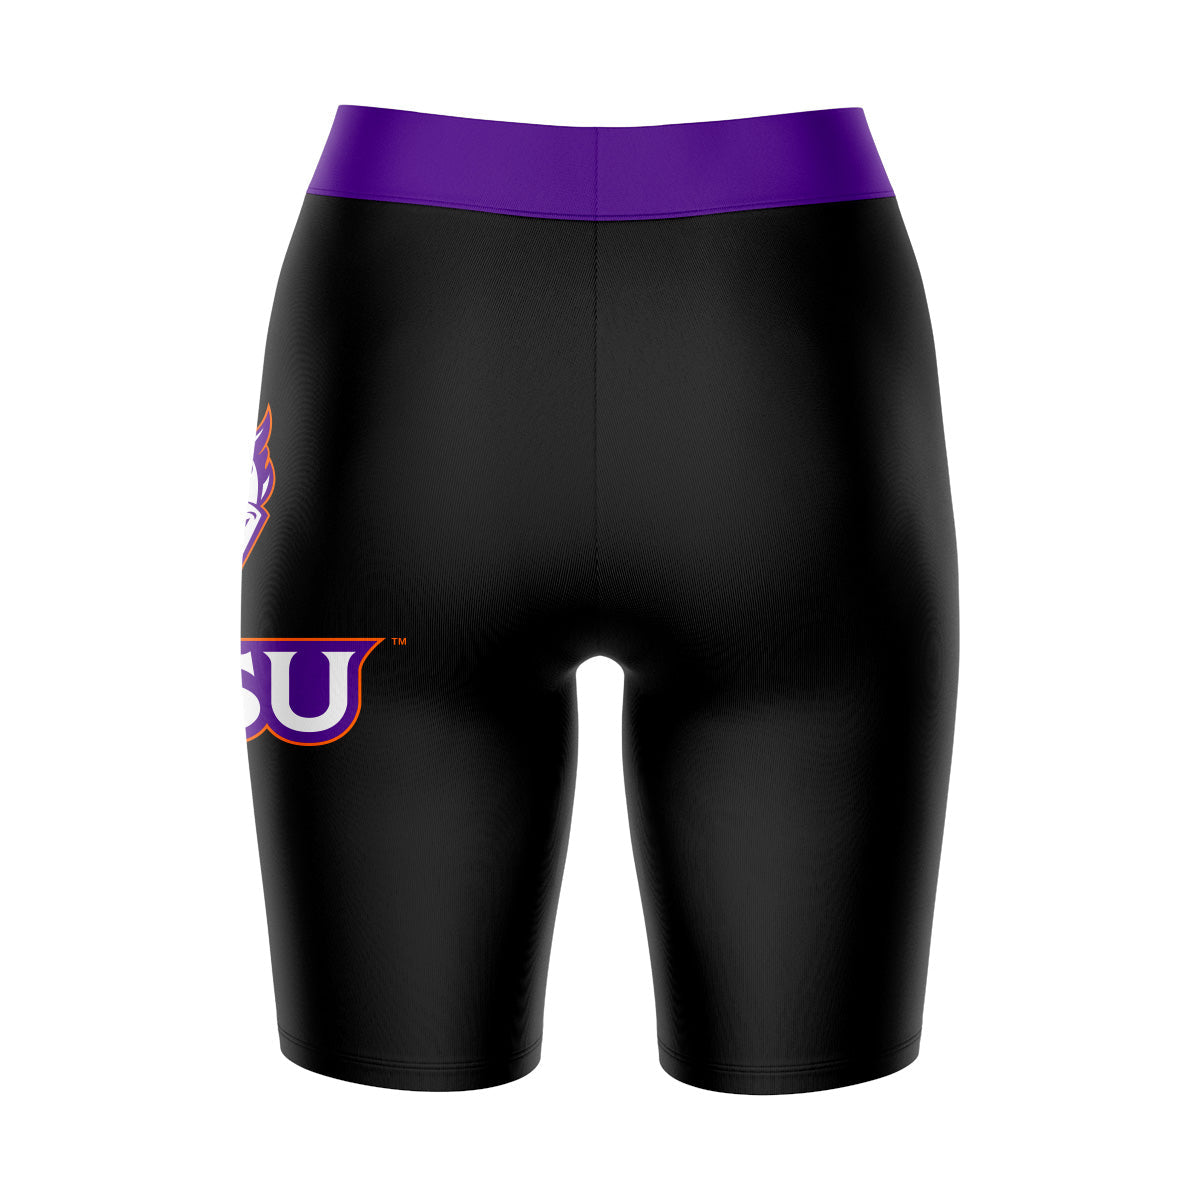 NSU Demons Vive La Fete Game Day Logo on Thigh and Waistband Black and Purple Women Bike Short 9 Inseam"